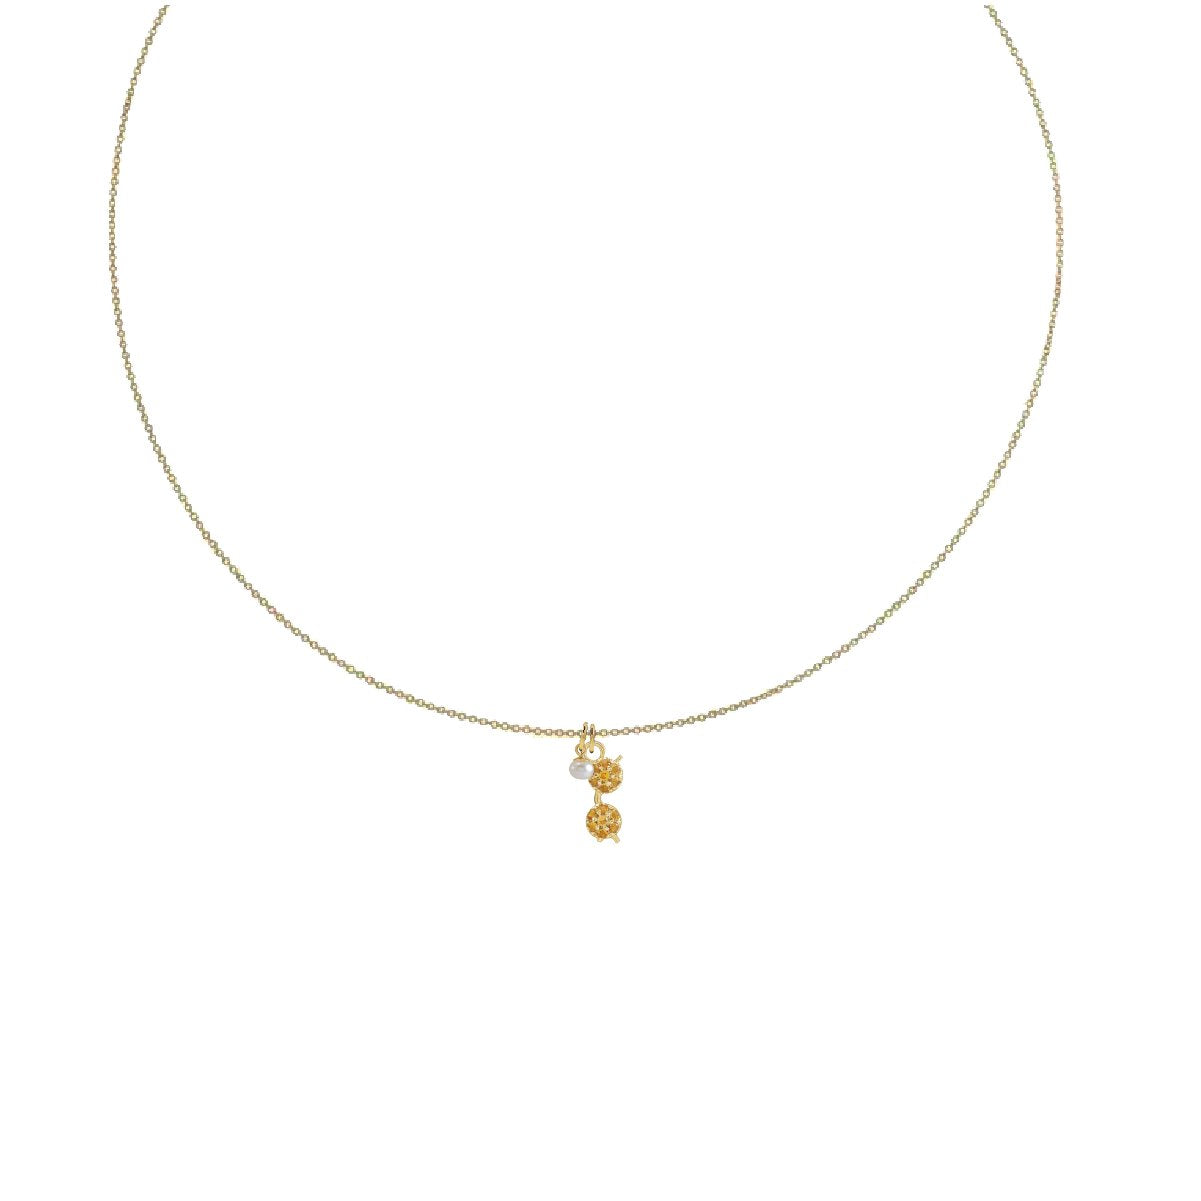 Charm Collection - For the Sun Worshipper Robyn Canady Charm + 14K Gold Filled Chain Add a Pearl 